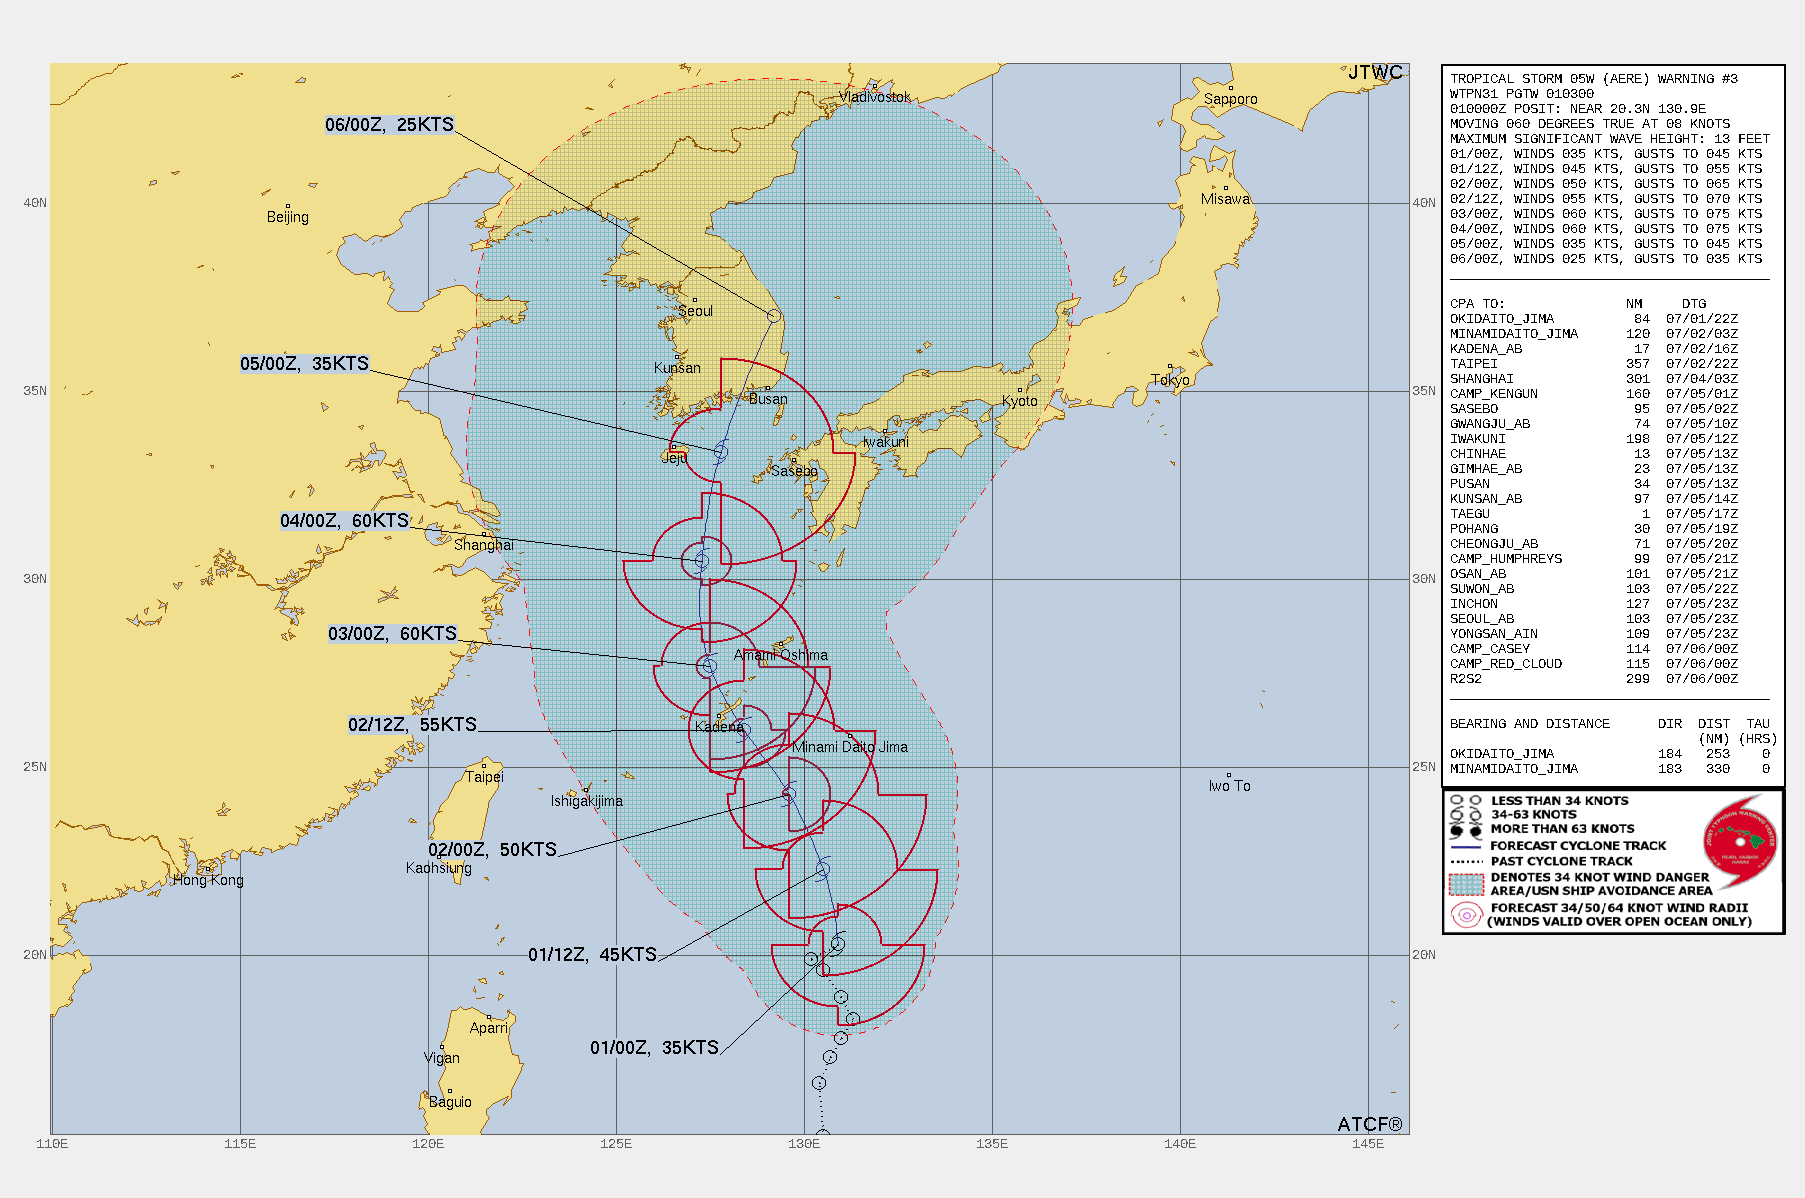 FORECAST REASONING.  SIGNIFICANT FORECAST CHANGES: FORECAST TRACK BEYOND TAU 72 IS NOW PLACED MORE NORTHWARD THAN PREVIOUSLY FORECAST. MAX INTENSITY HAS INCREASED TO 60 KNOTS AT TAU 48.  FORECAST DISCUSSION: TS AERE IS FORECAST TO TRACK NORTH-NORTHWEST AND INCREASE IN INTENSITY DUE TO STAYING IN A FAVORABLE ENVIRONMENT  THROUGH TAU 72. BY TAU 24, THE SYSTEM WILL GRADUALLY INCREASE IN  INTENSITY TO 50 KNOTS AS IT TRACKS NORTH-NORTHWARD. BY TAU 36, TS  AERE WILL BE PUSHED MORE NORTHWESTWARD DUE TO THE BUILDING RIDGE FROM  THE NORTHEAST. AT THE SAME TIME, TS AERE WILL INCREASE IN INTENSITY  TO 55 KTS BEFORE PASSING OVER OKINAWA. BY TAU 48, THE SYSTEM WILL  BEGIN TO ROUND THE RIDGE AXIS AND TRACK NORTHWARD. INTENSITY WILL  CONTINUE TO INCREASE AND REACH THE MAX OF 60 KNOTS AT THIS TIME. BY  TAU 72, TS AERE WILL MAINTAIN THIS INTENSITY, BUT BEGIN TO FEEL  THE STRAIN OF AN UPPER LEVEL LOW AND THE COOLER WATERS (25-26C). AT  THIS TIME, THE SYSTEM WILL FALL UNDER THE INFLUENCE OF AN APPROACHING  MID-LEVEL TROUGH AND DRIVE IT NORTH-NORTHEASTWARD HEADING TOWARDS THE  KOREAN PENINSULA. AT TAU 120, LAND INTERACTION WILL CONTRIBUTE TO  DISSIPATION OF TS AERE.